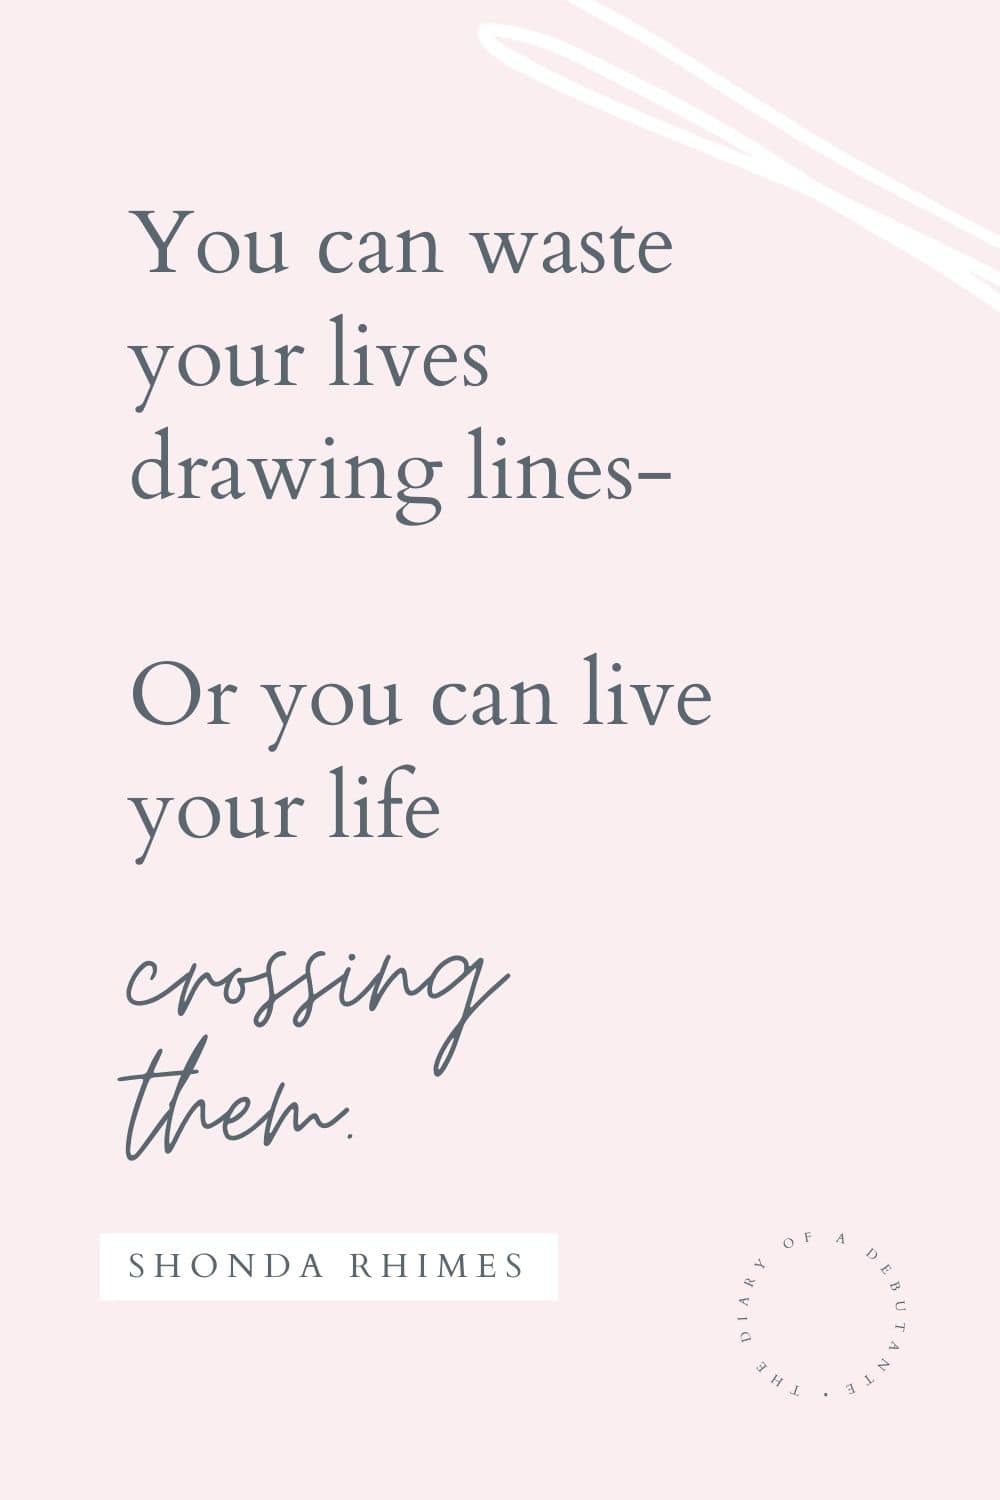 Shonda Rhimes quote curated as part of a collection of inspirational female quotes for office by blogger Stephanie Ziajka on Diary of a Debutante